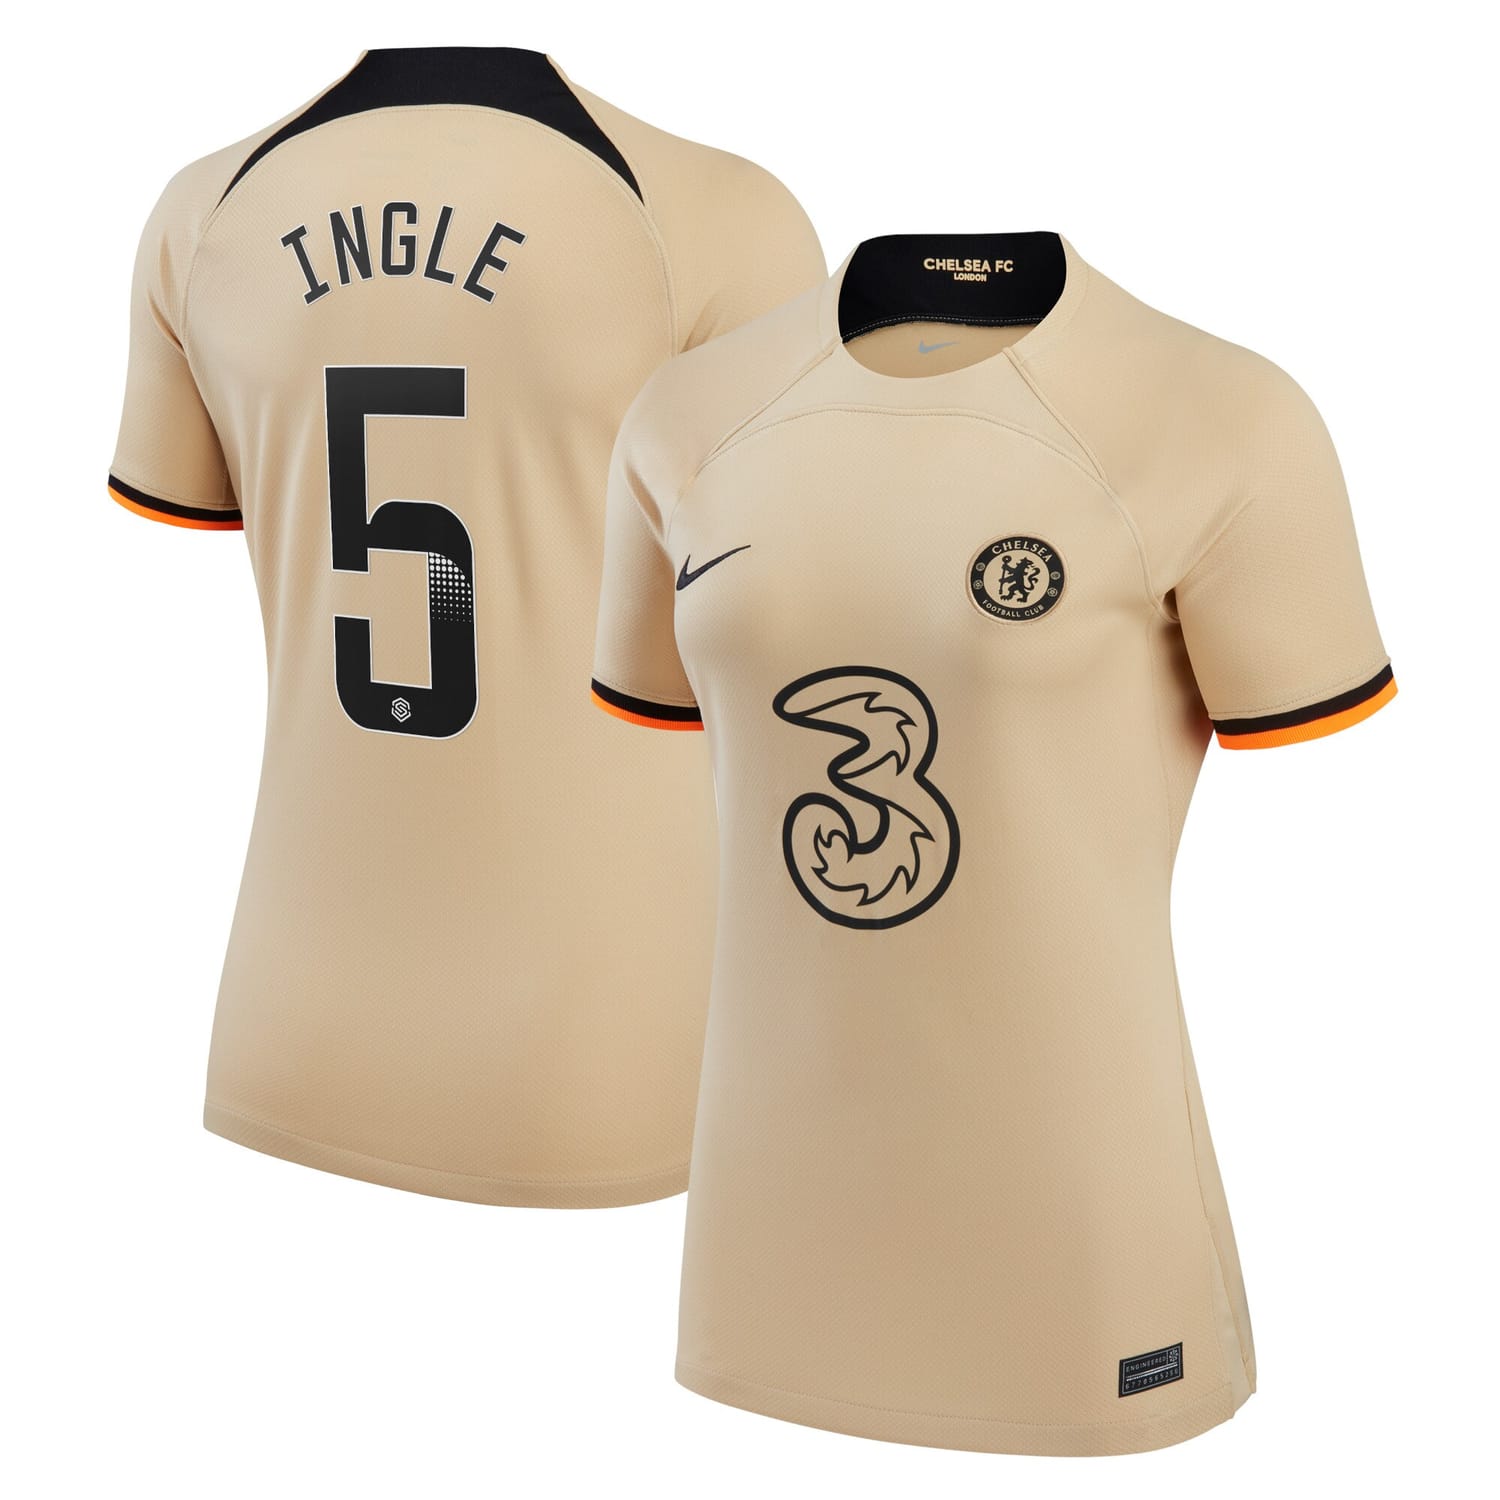 Premier League Chelsea Third WSL Jersey Shirt 2022-23 player Sophie Ingle 5 printing for Women